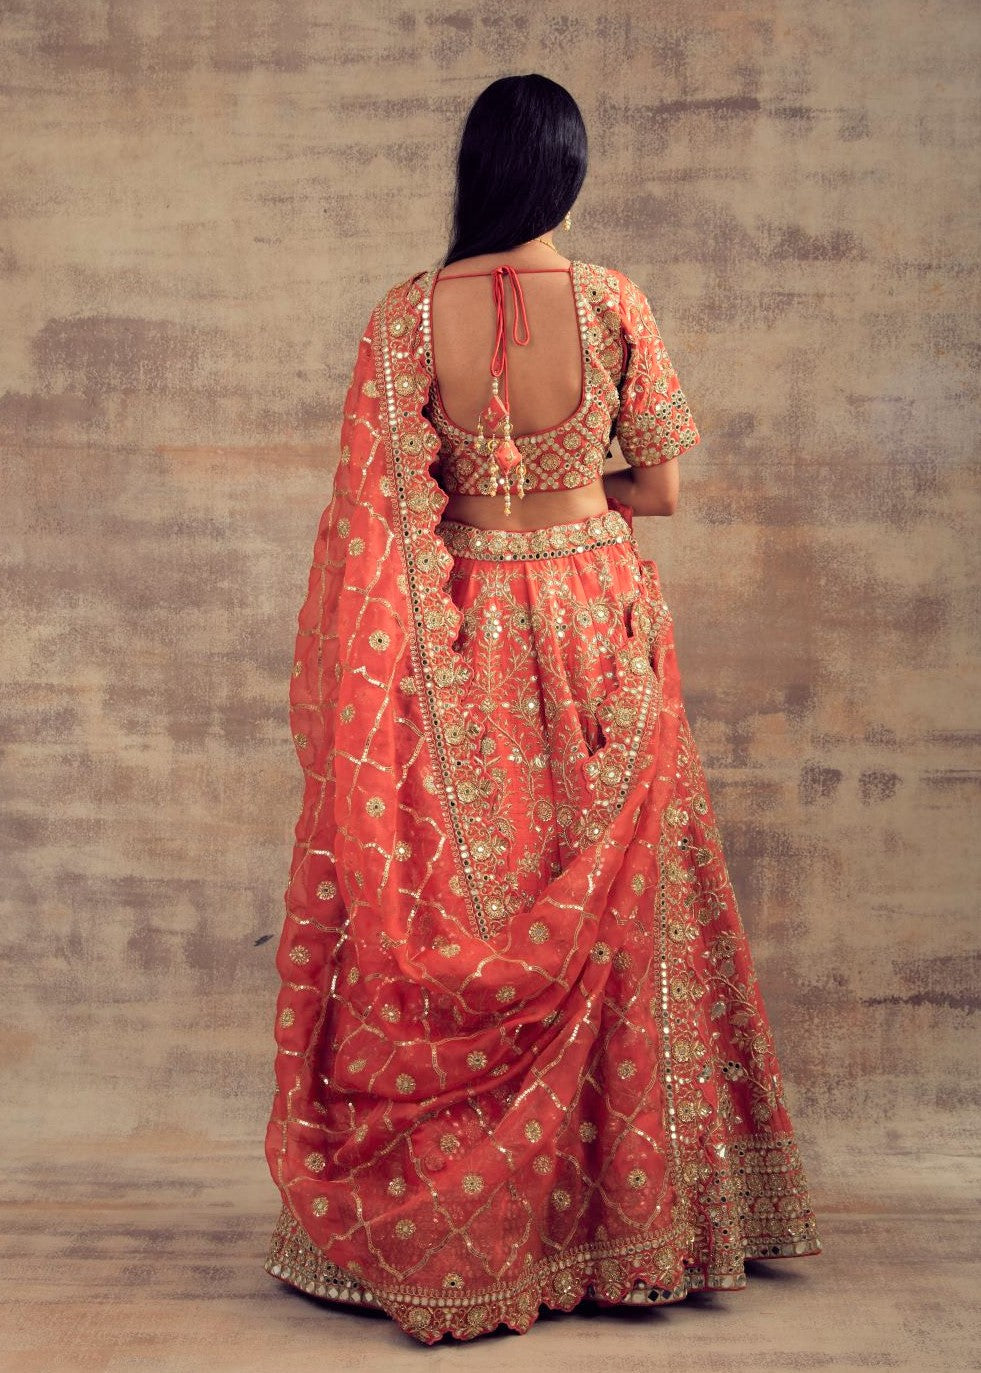 Coconut and rose gold hand embroidered lehenga set. – Arpita Mehta Official